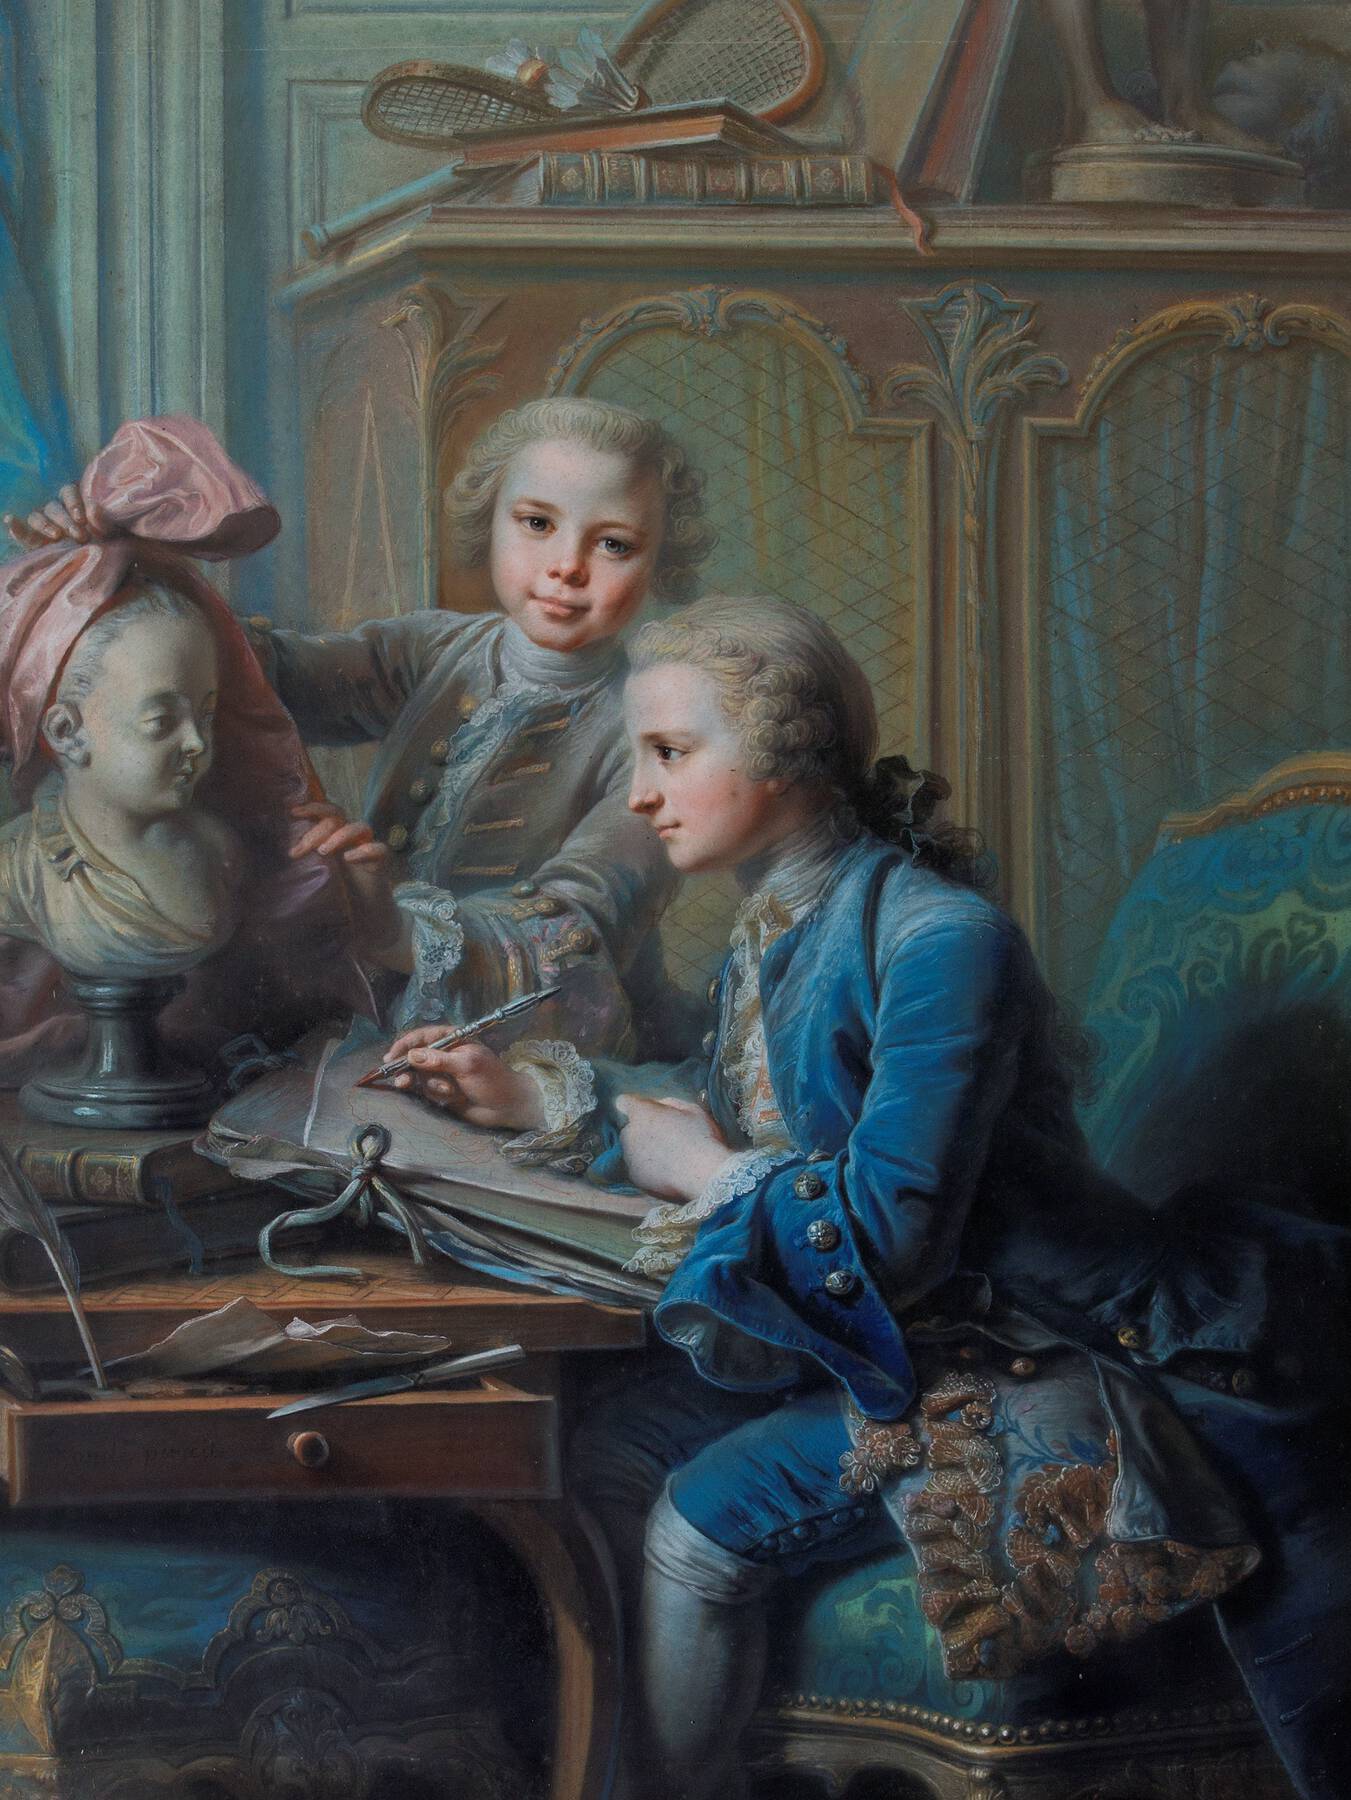 two young boys dressed in elaborate 18th-century costumes in varying shades of blue, positioned in front of a cabinet with wire mesh; one sits at a desk with an open drawer and writes, while the other stands behind the desk and holds a piece of pink satin against a white bust of a woman